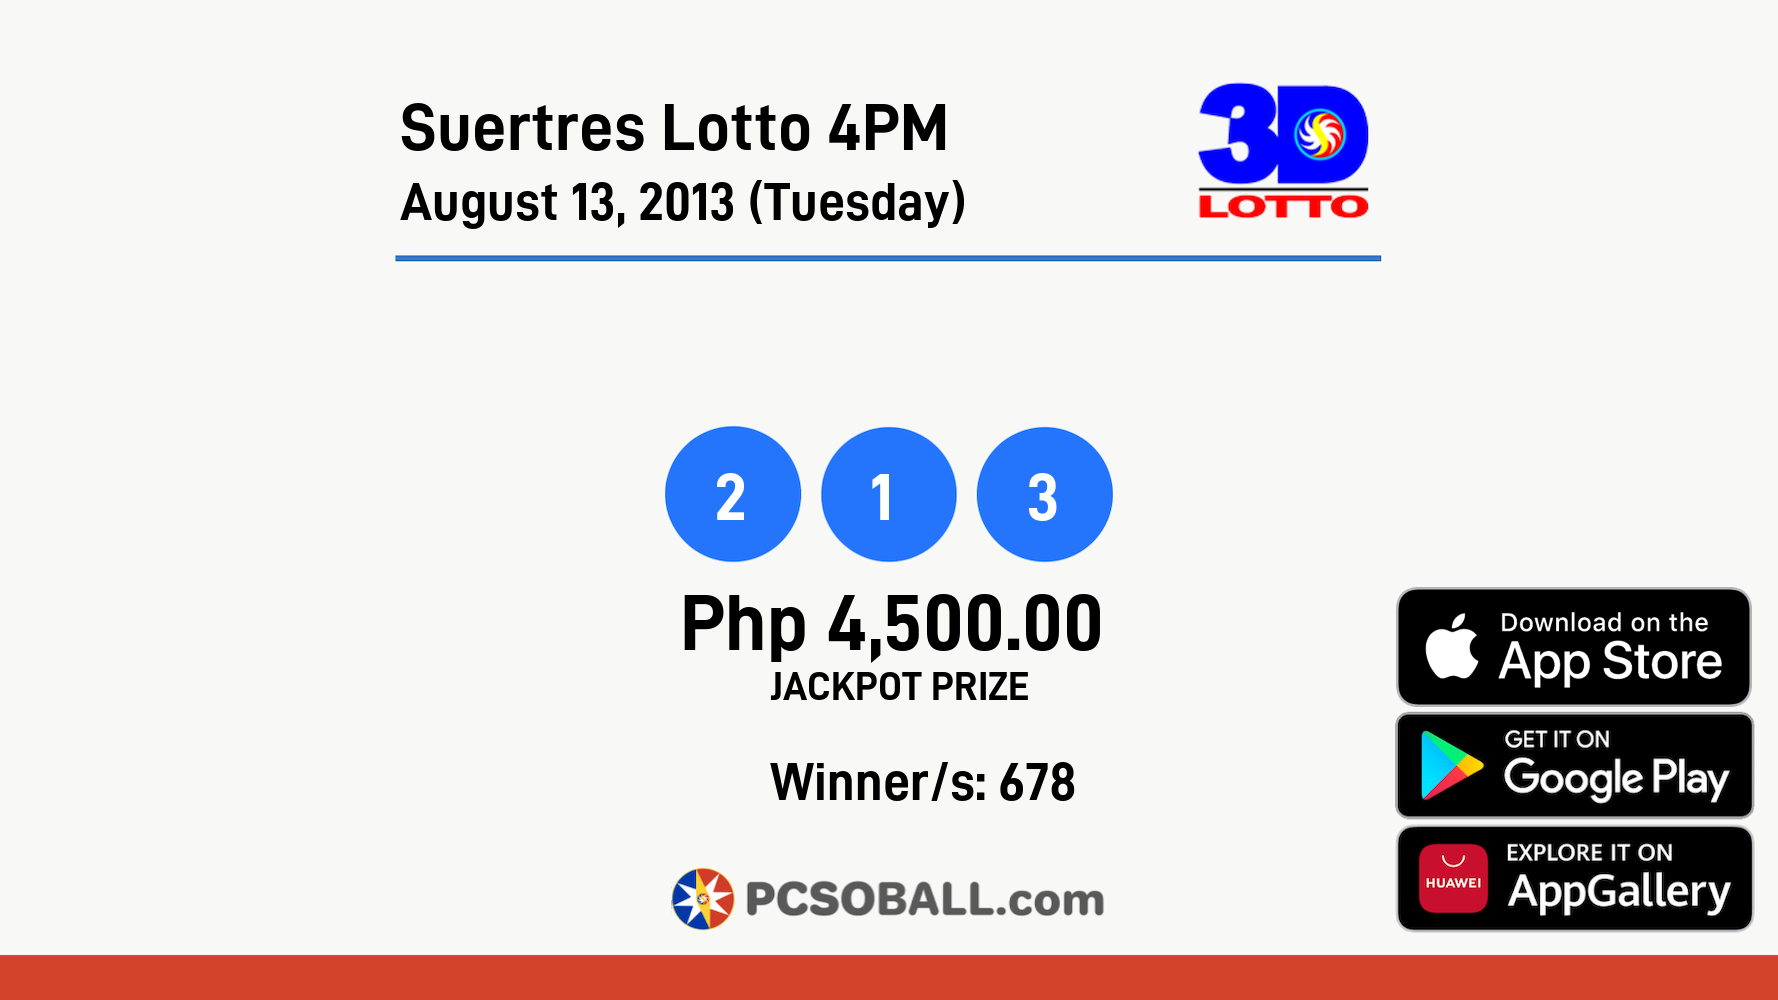 Suertres Lotto 4PM August 13, 2013 (Tuesday) Result